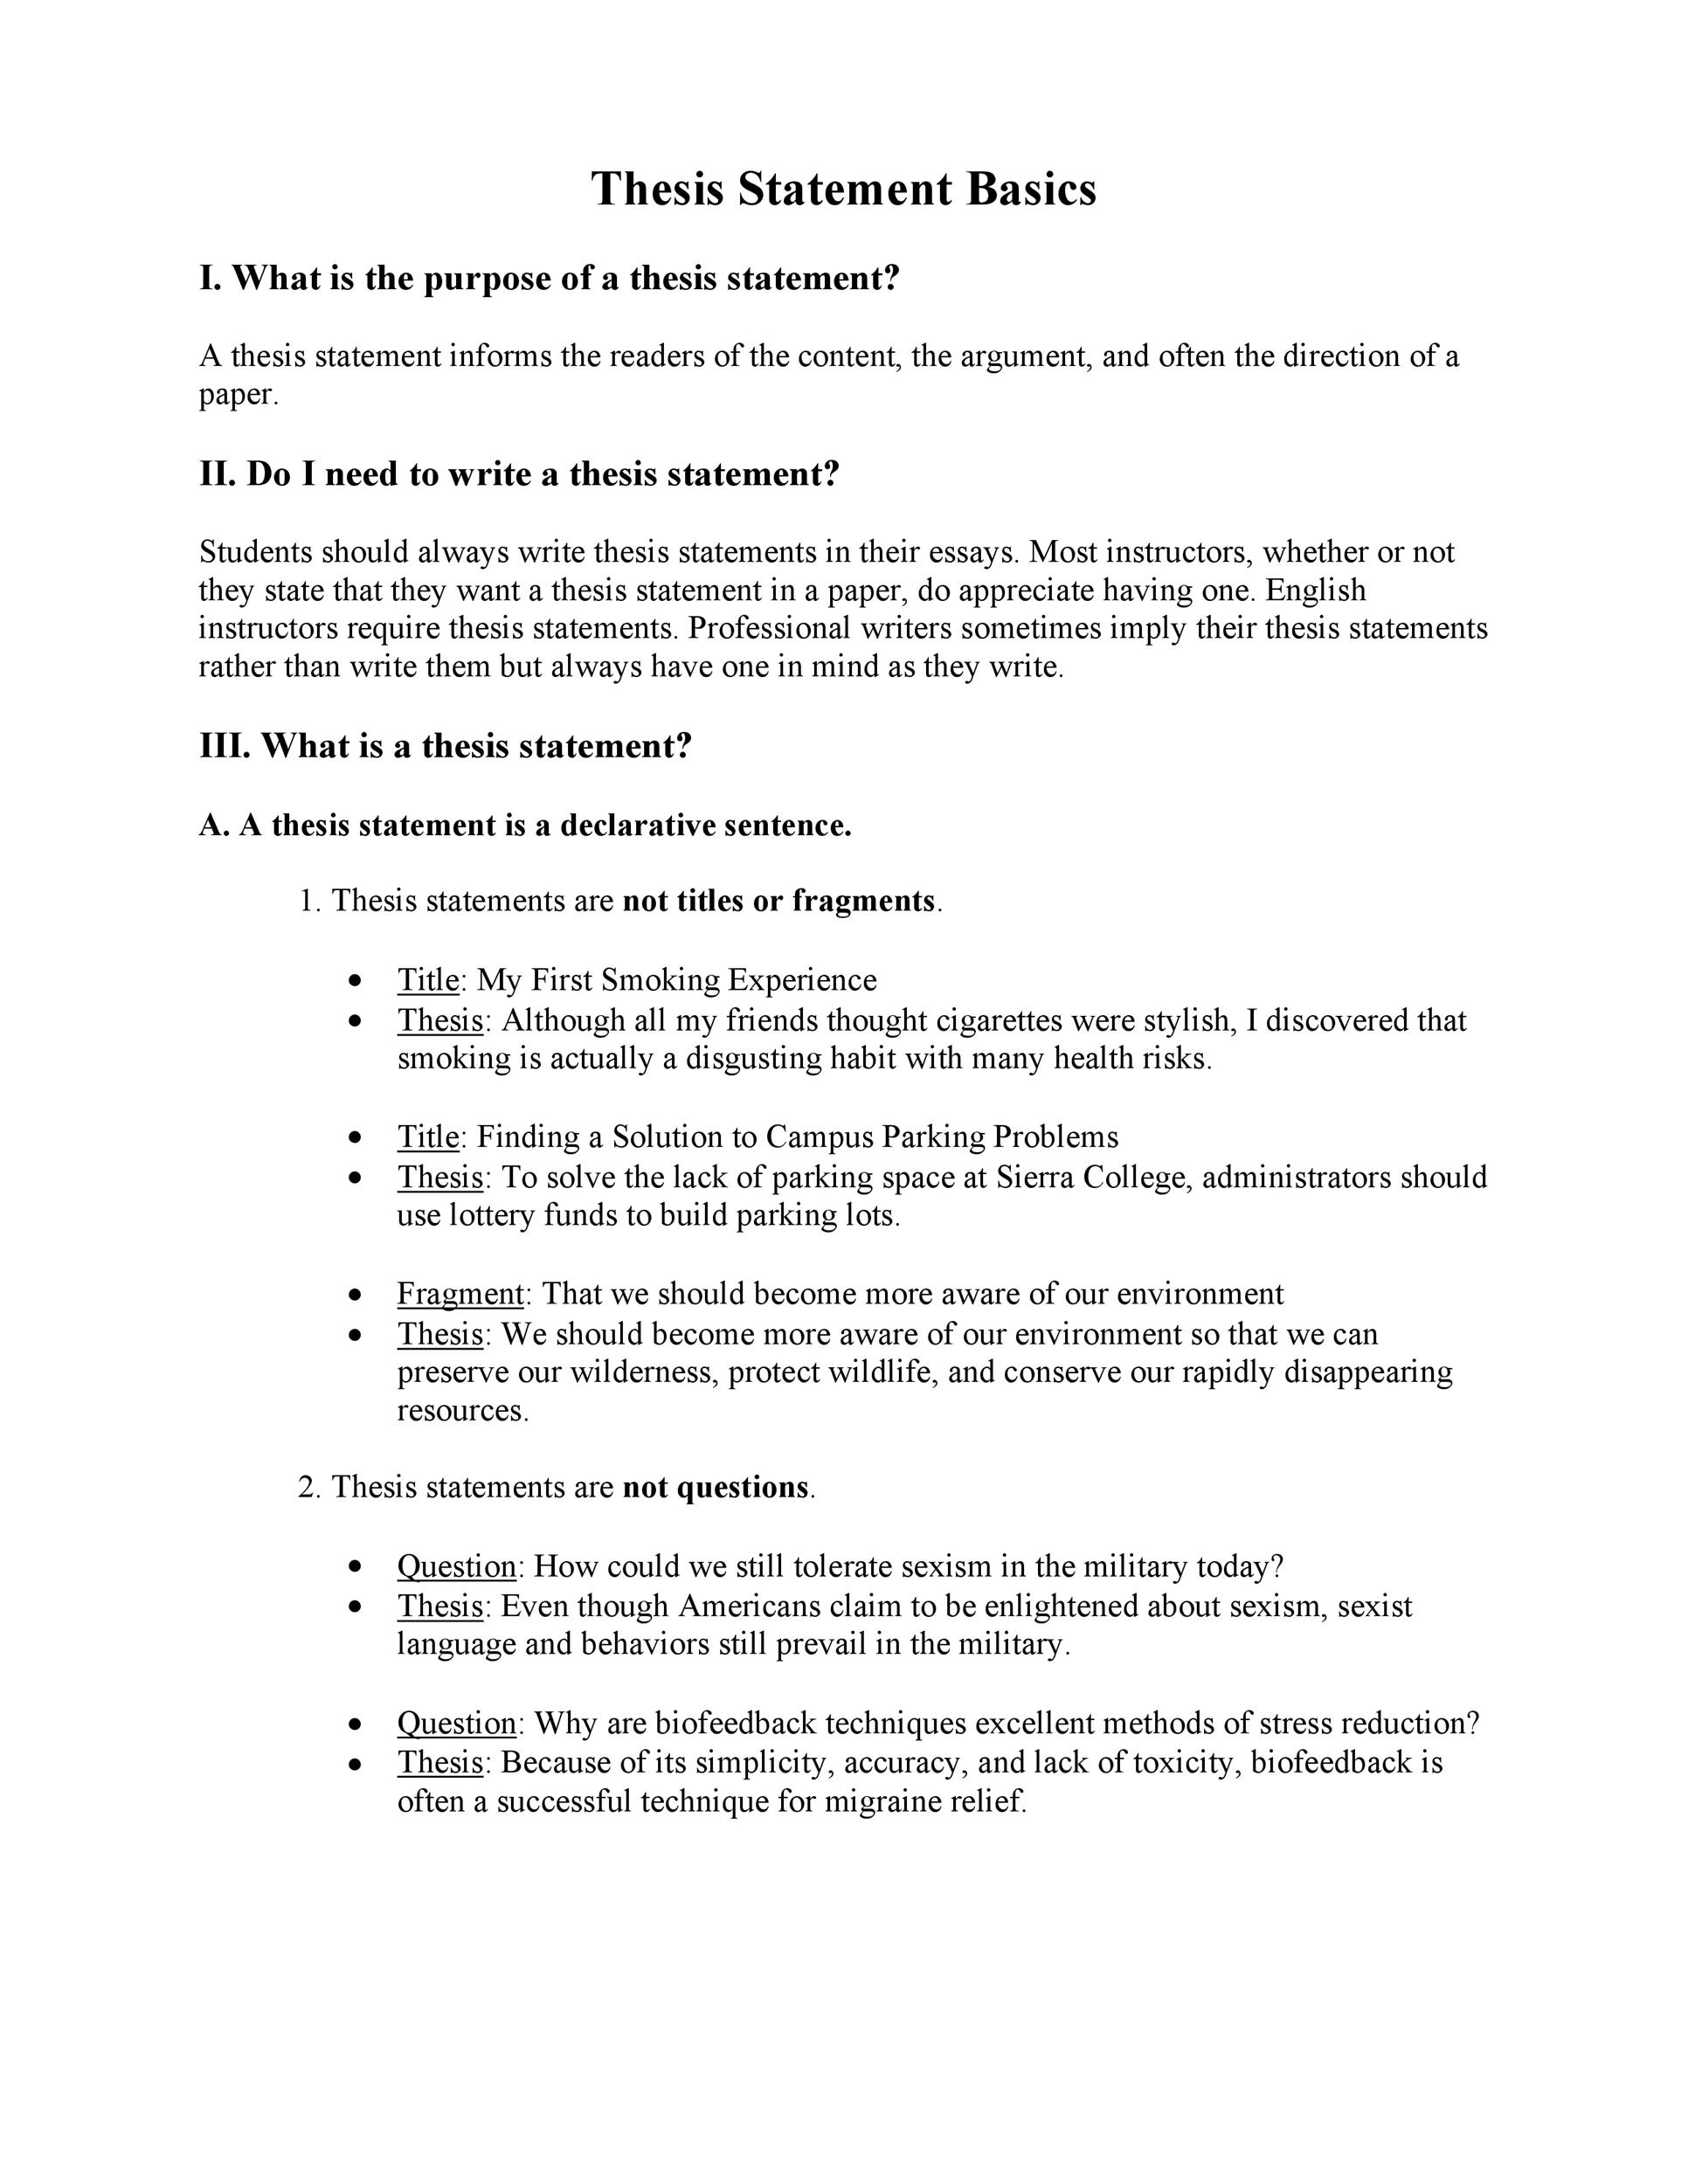 how to write a thesis statement examples pdf